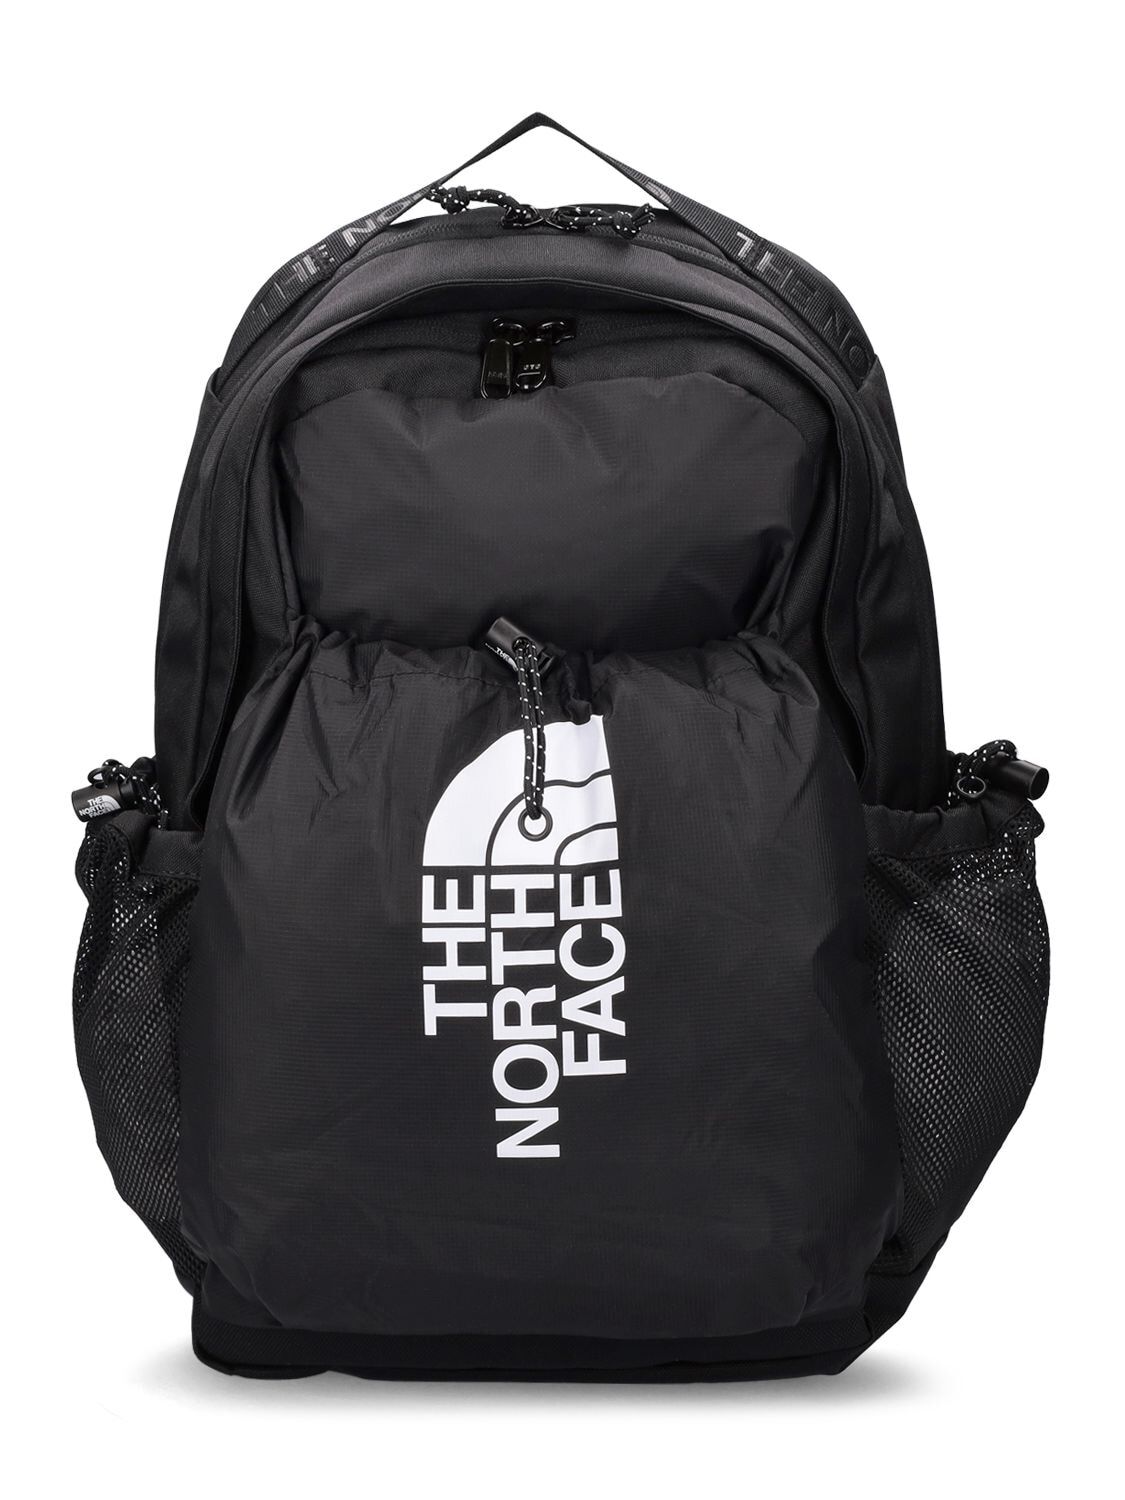 THE NORTH FACE Bozer Backpack in black